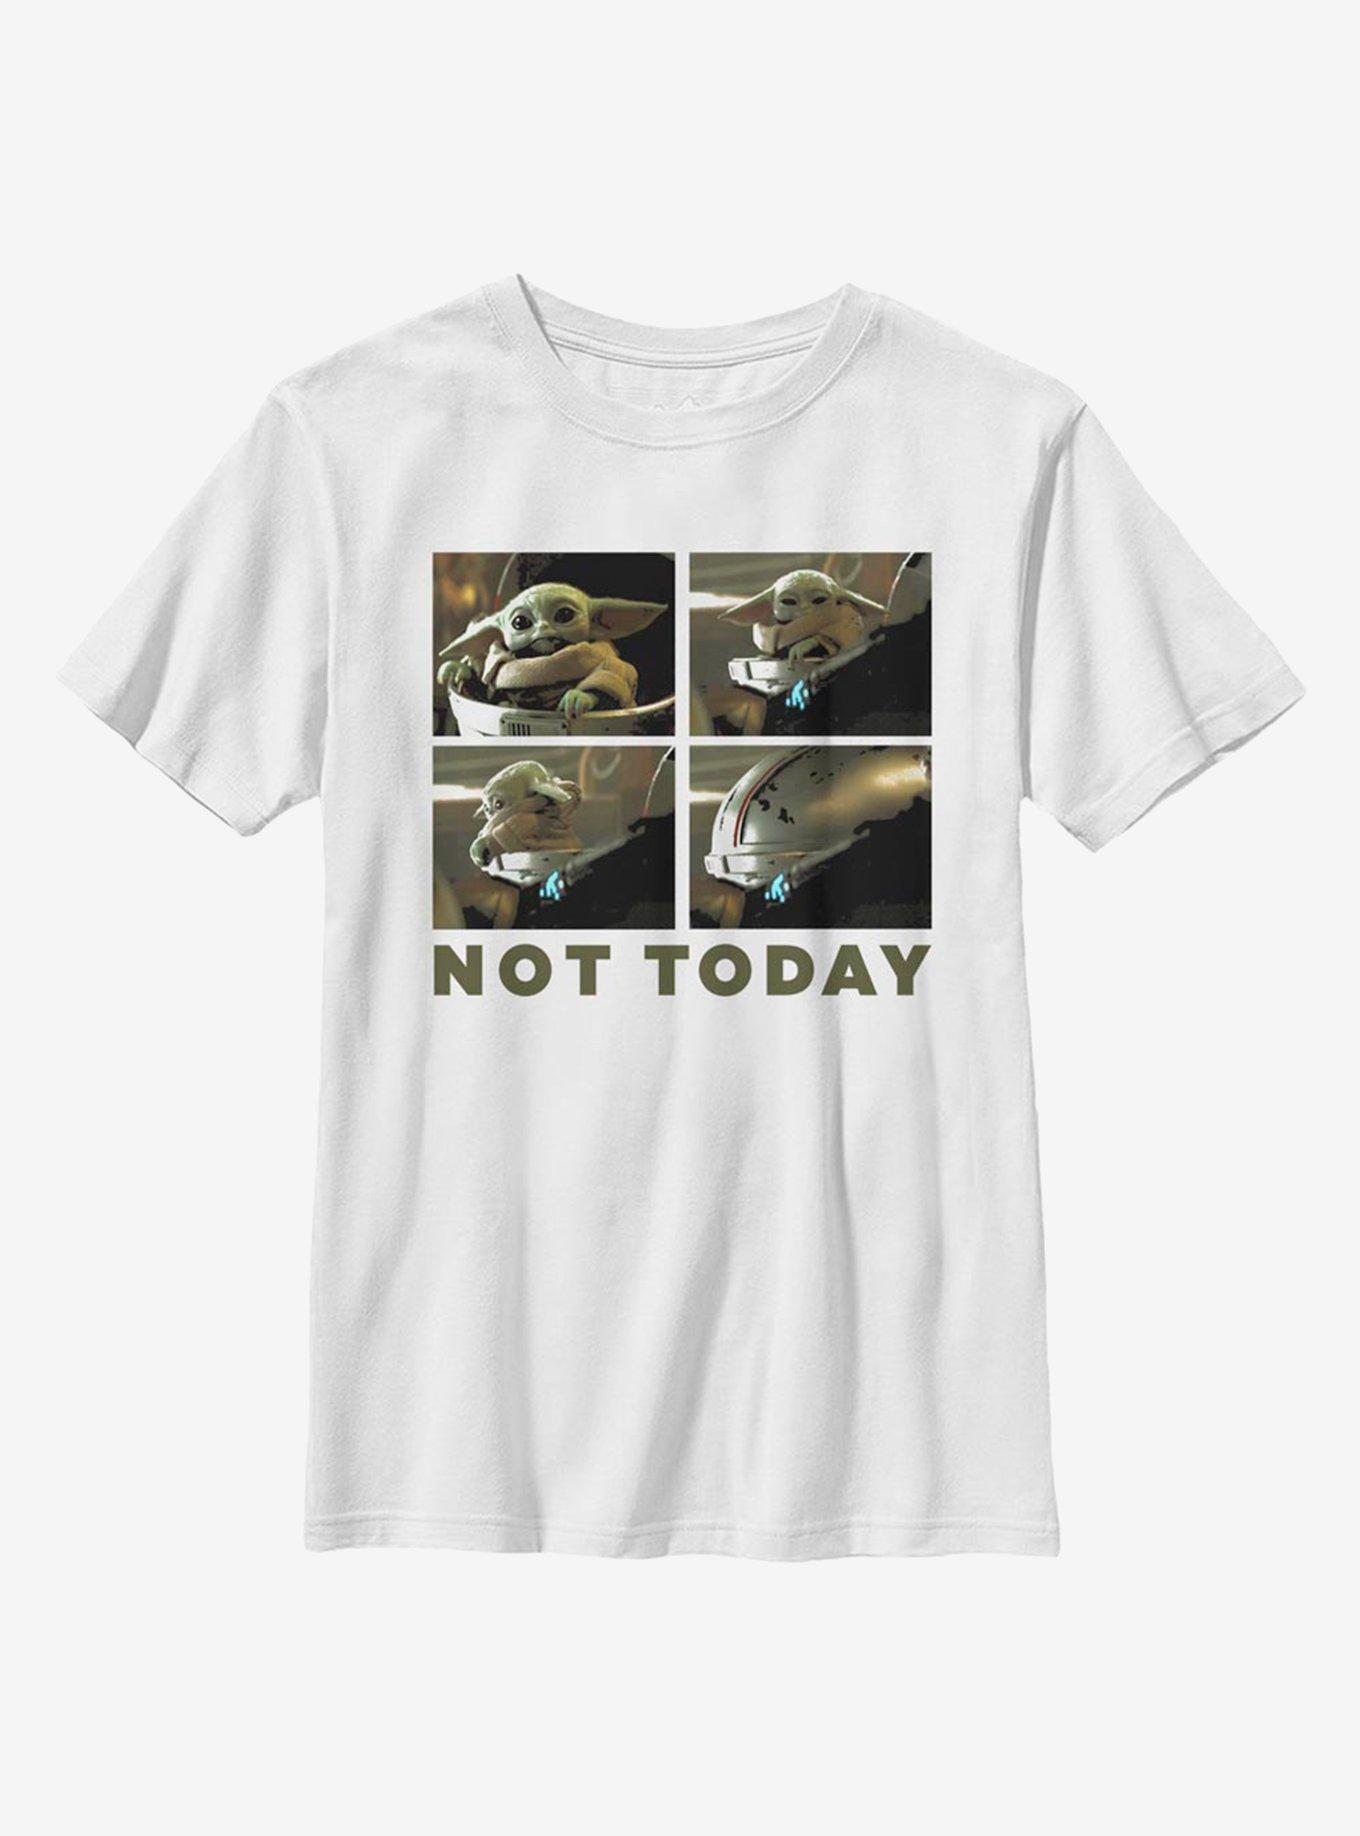 Star Wars The Mandalorian The Child Not Today Youth T-Shirt, WHITE, hi-res